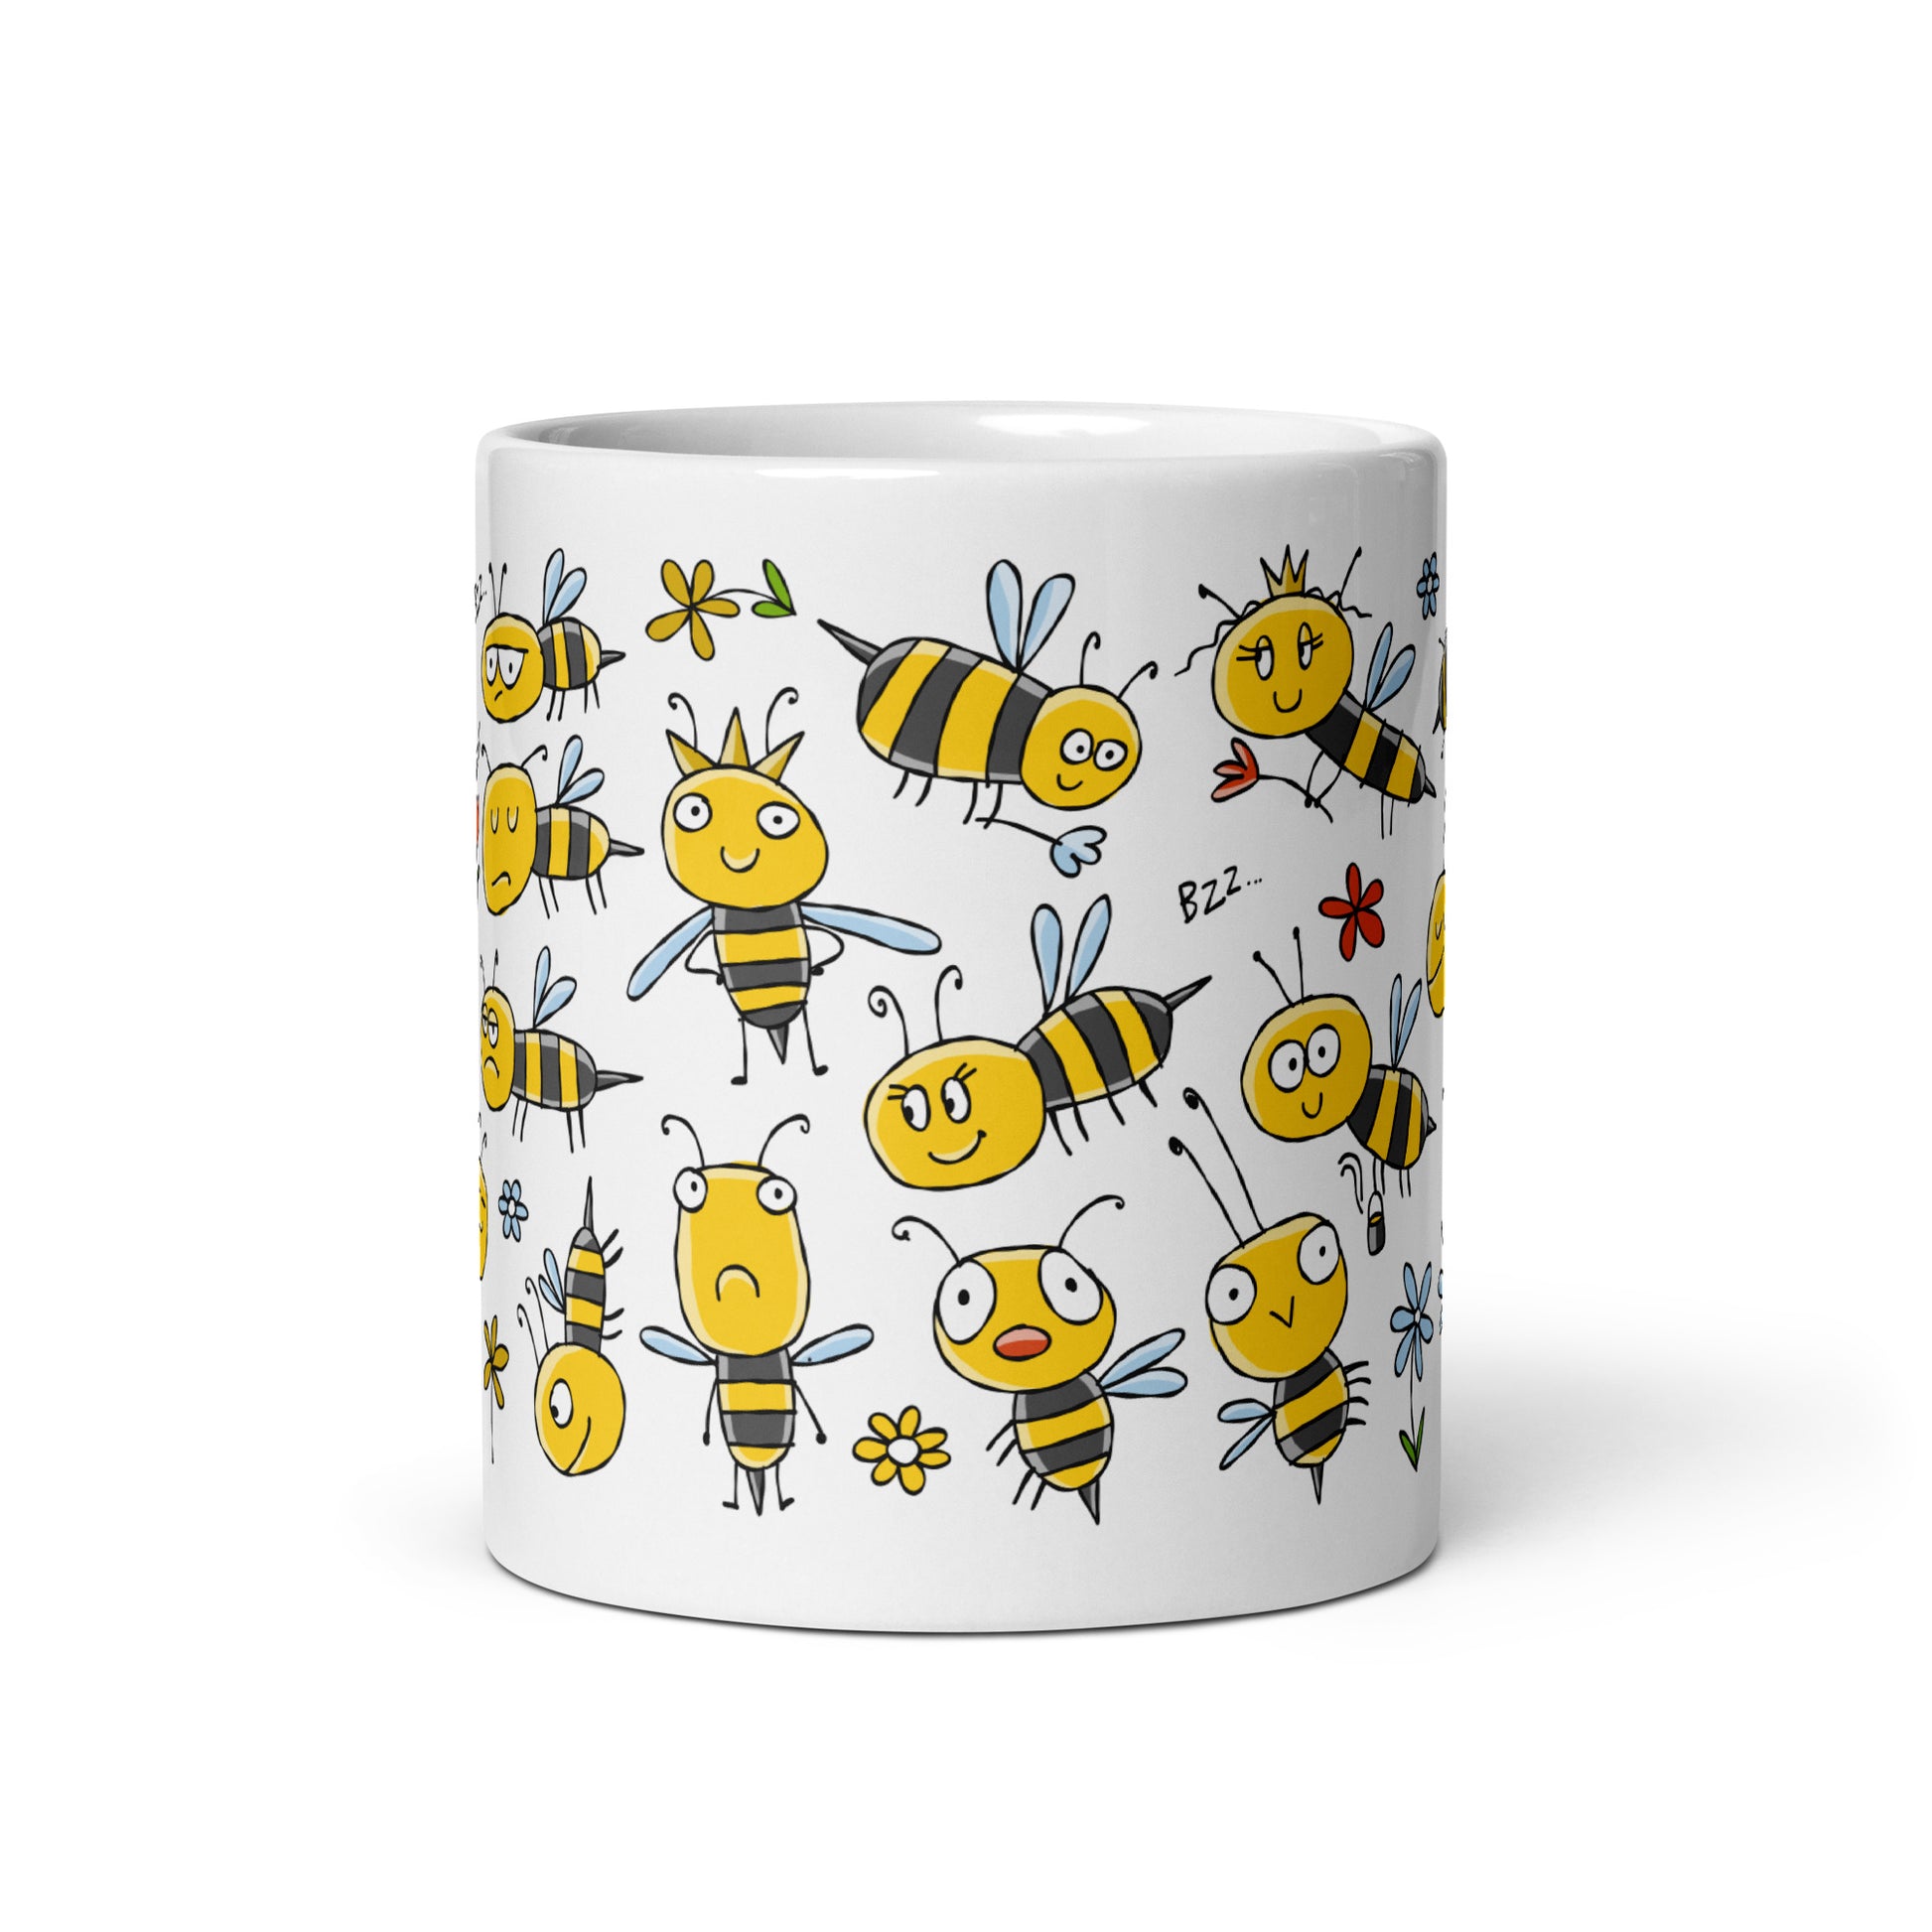 11 oz ceramic mug with Beehive print - funny and cute yellow bees characters.